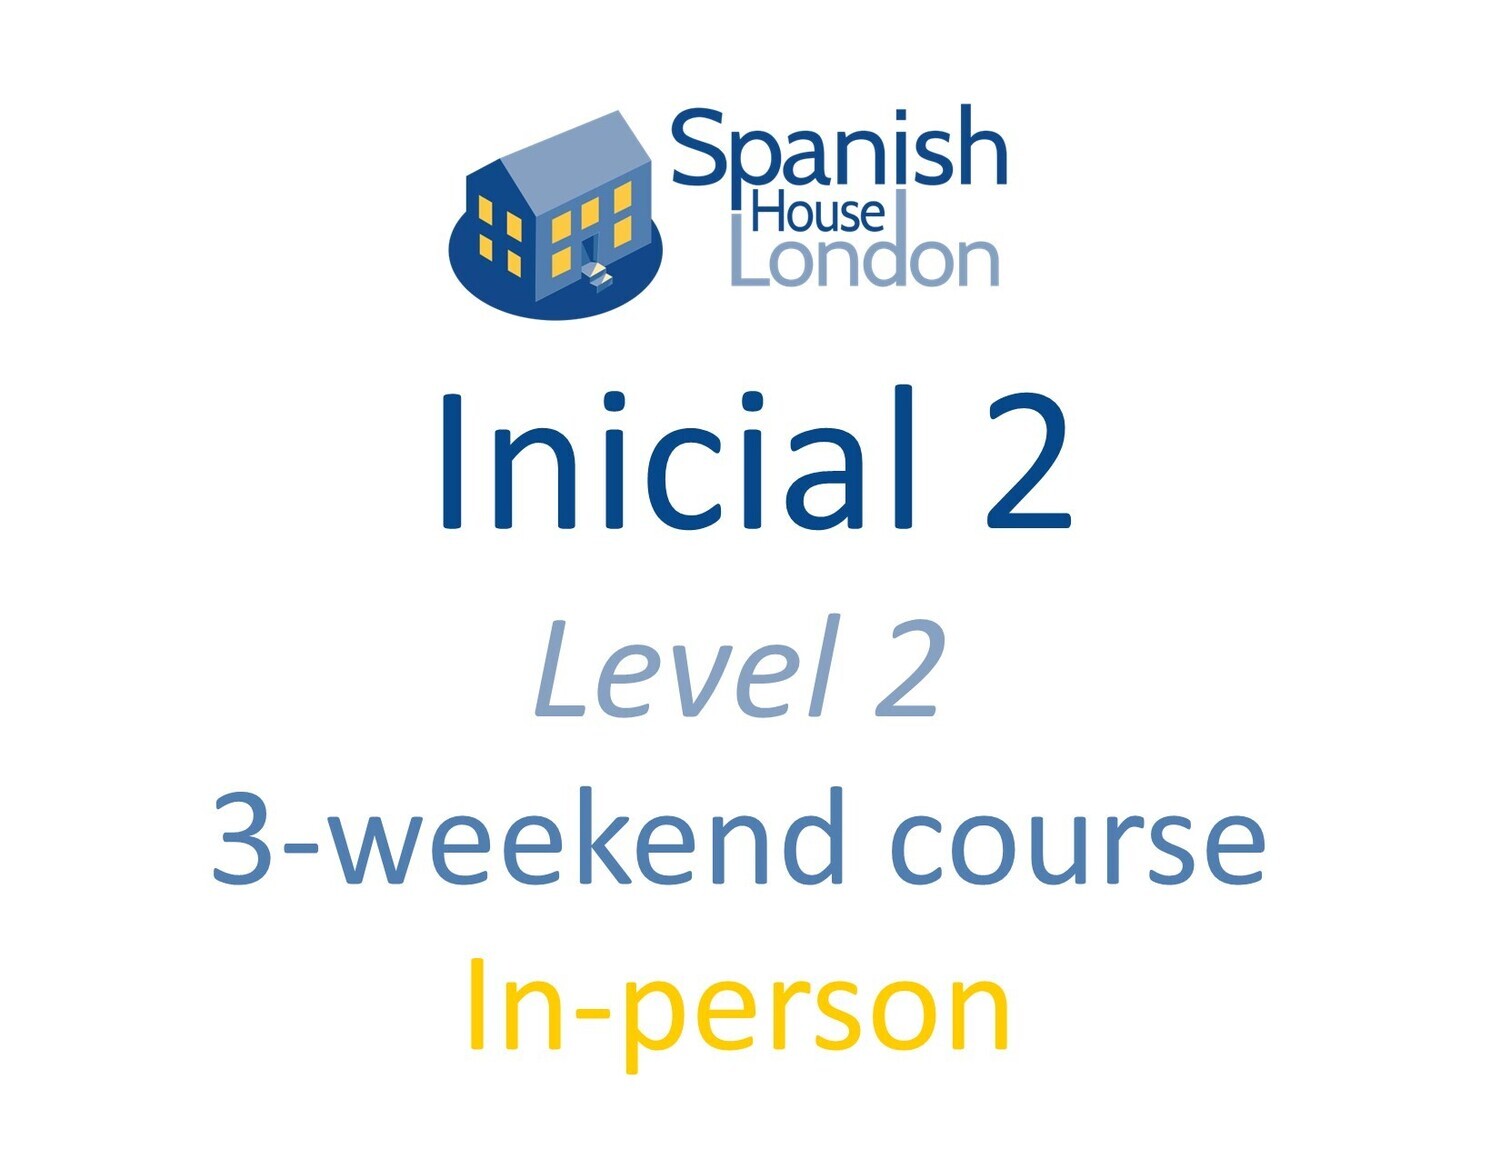 Weekend-Intensive Inicial 2 Course starting on 25th August at 7pm in Clapham North